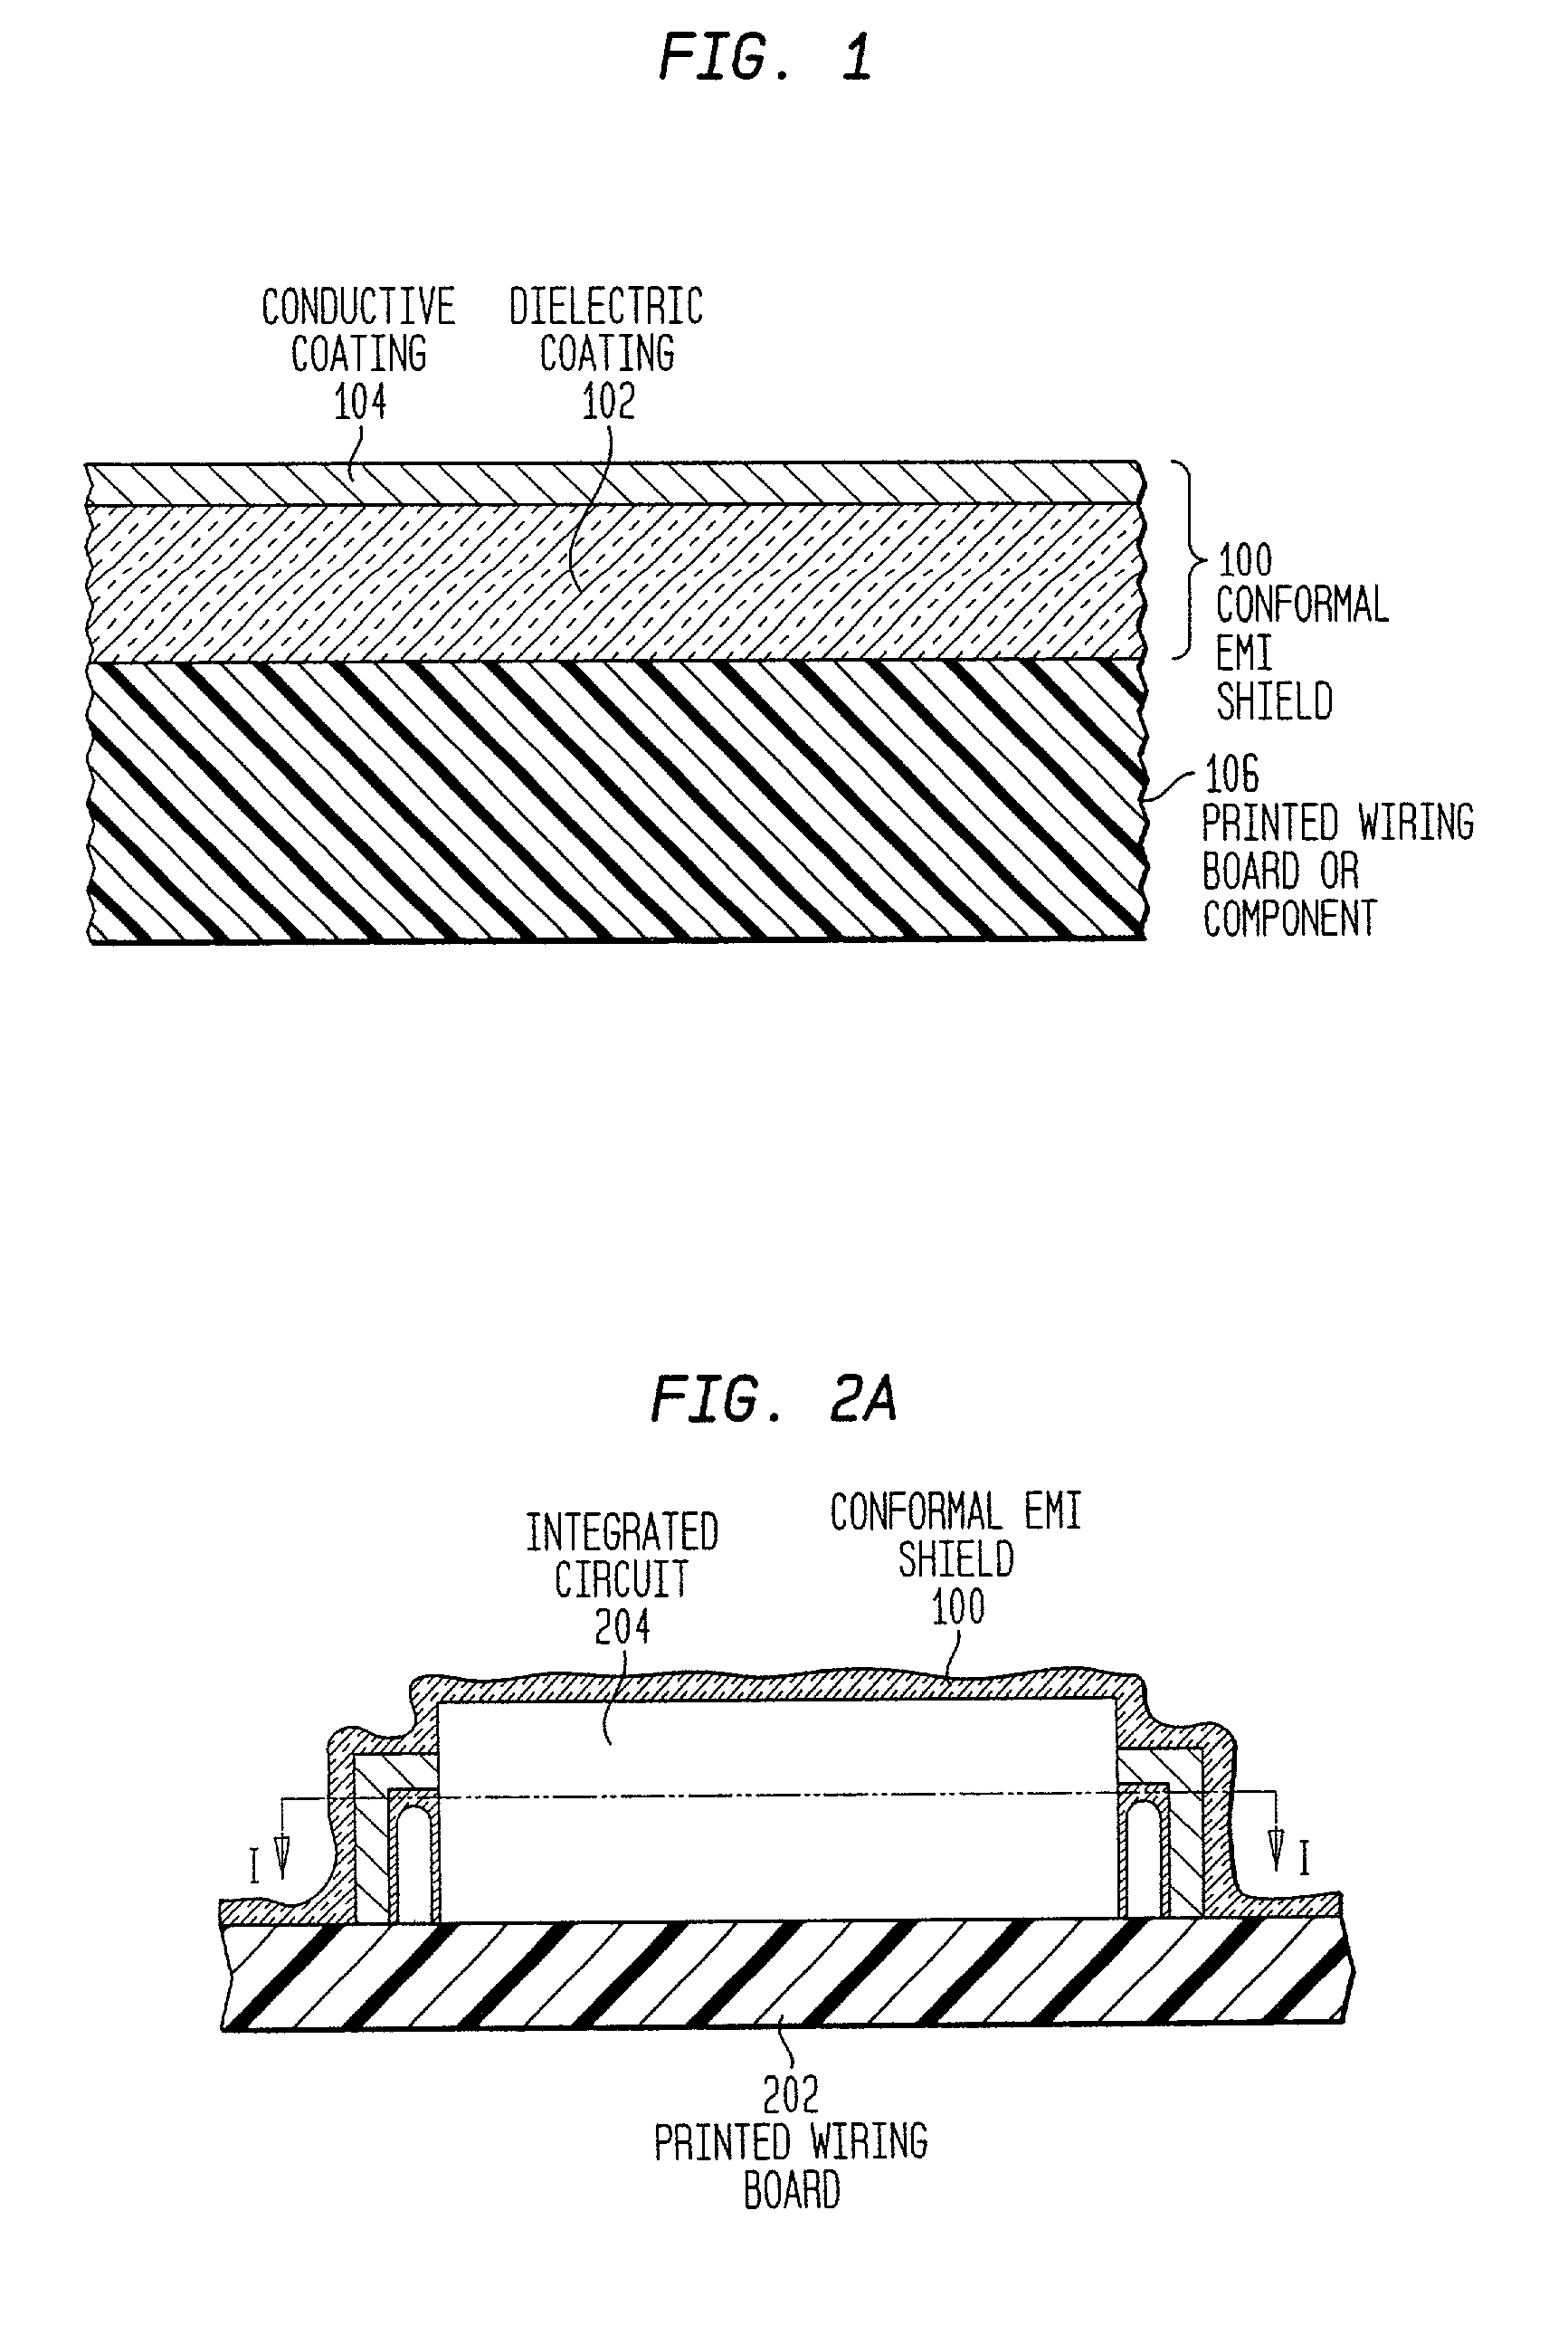 Board-level EMI shield that adheres to and conforms with printed circuit board component and board surfaces